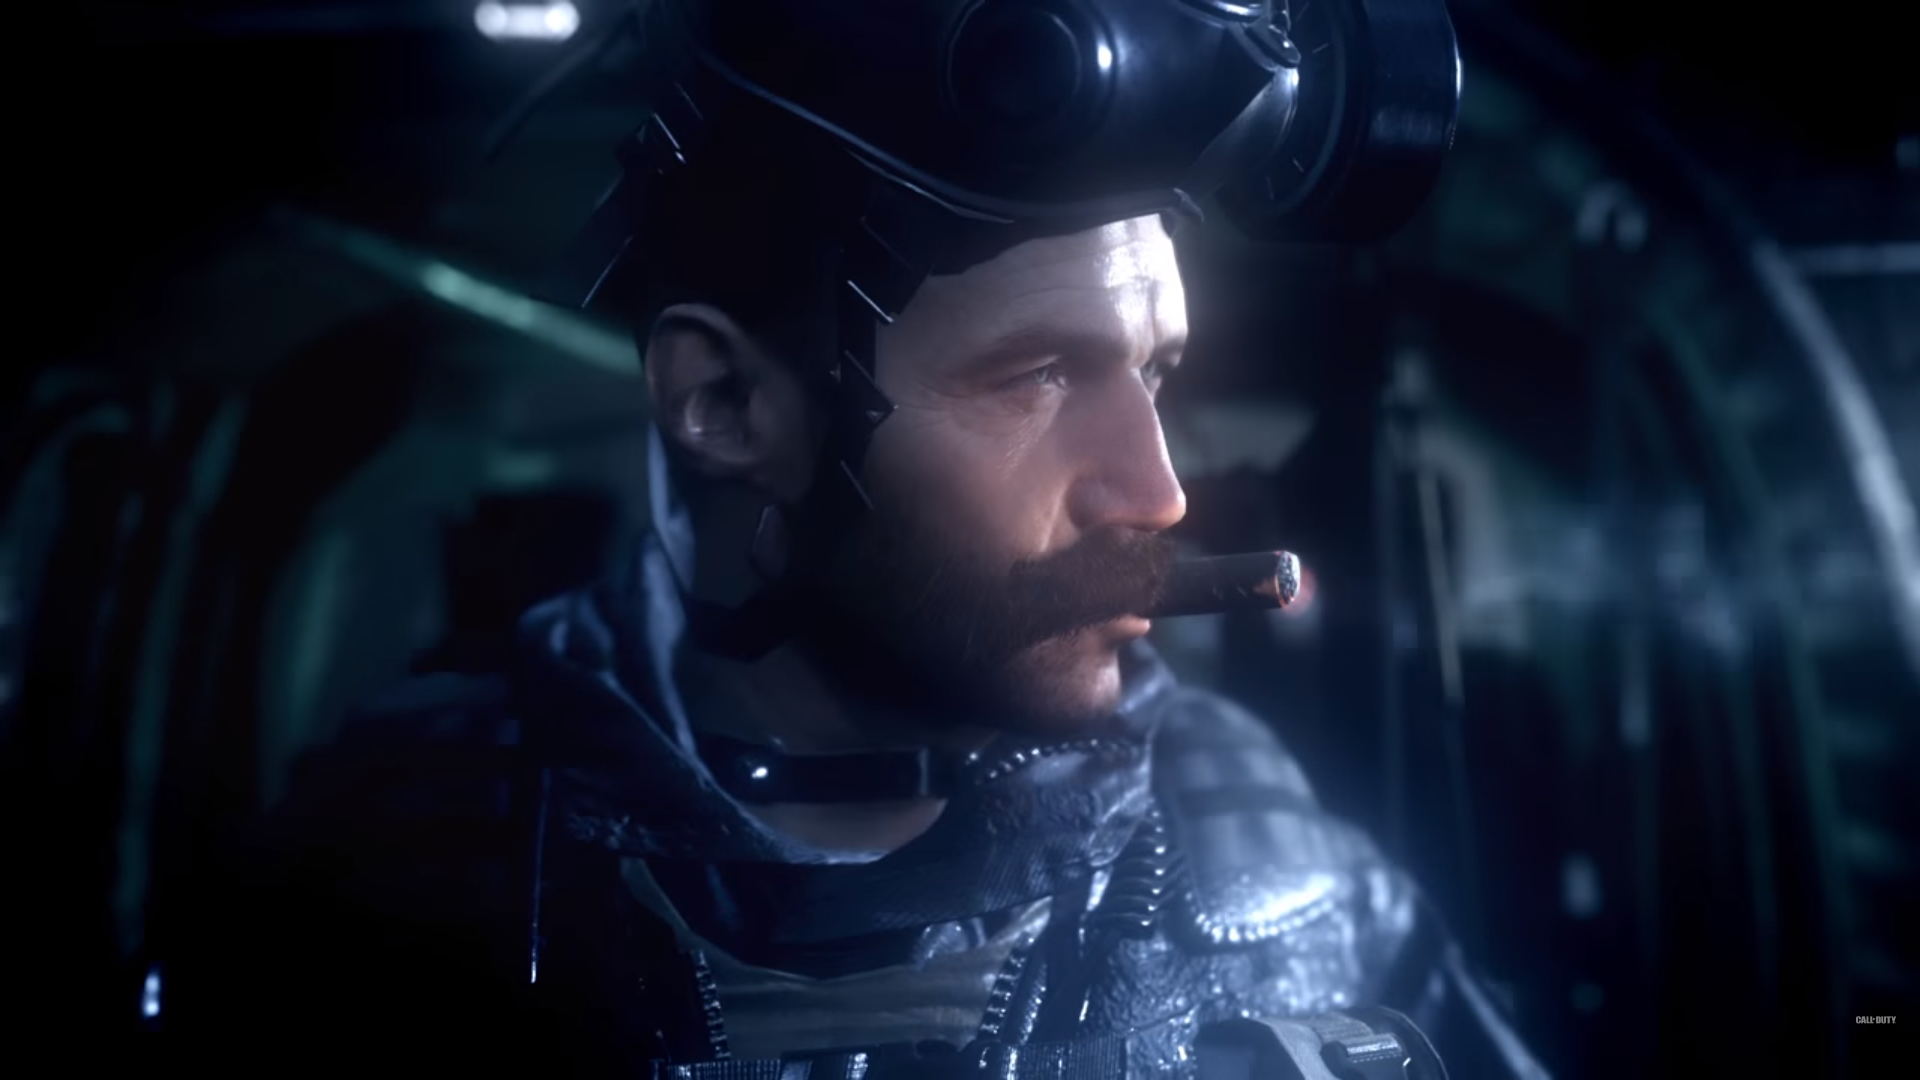 Call Of Duty Infinite Warfare And Modern Remastered